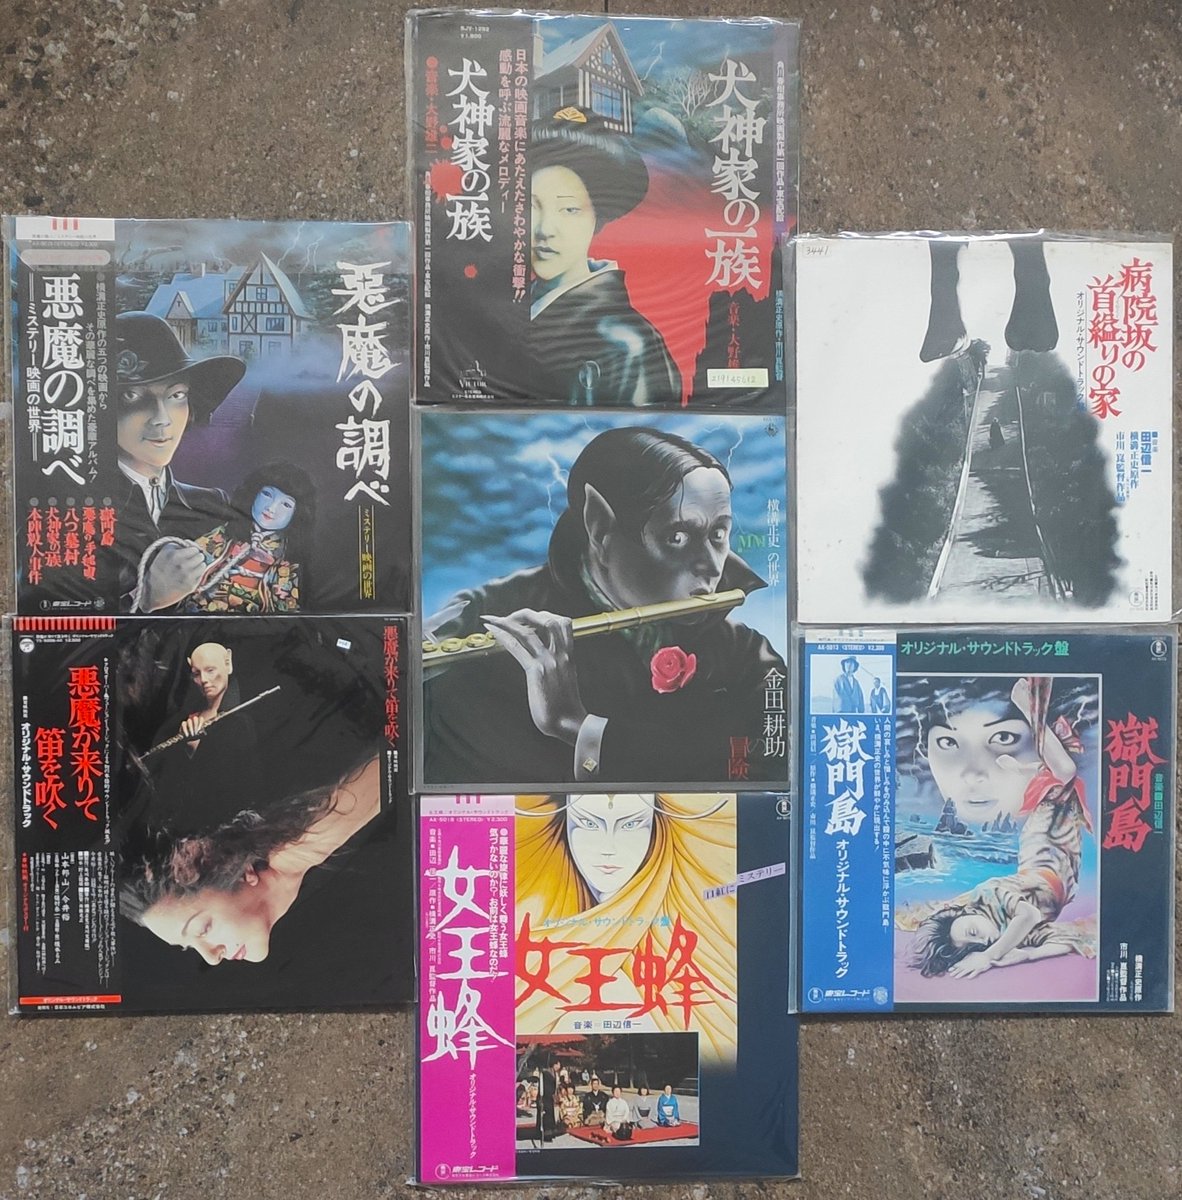 1/2
Day 29 of  @TheSlowEngineer 's #31daysofhorror #HorrorSoundtrackAtoZ and anything goes for the last 5 days. So celebrating all things Kosuke Kindaichi. 
I'm still missing a couple of Kindaichi LPs but have a fair share of them. Aside from the renowned Mystery Kindaichi..